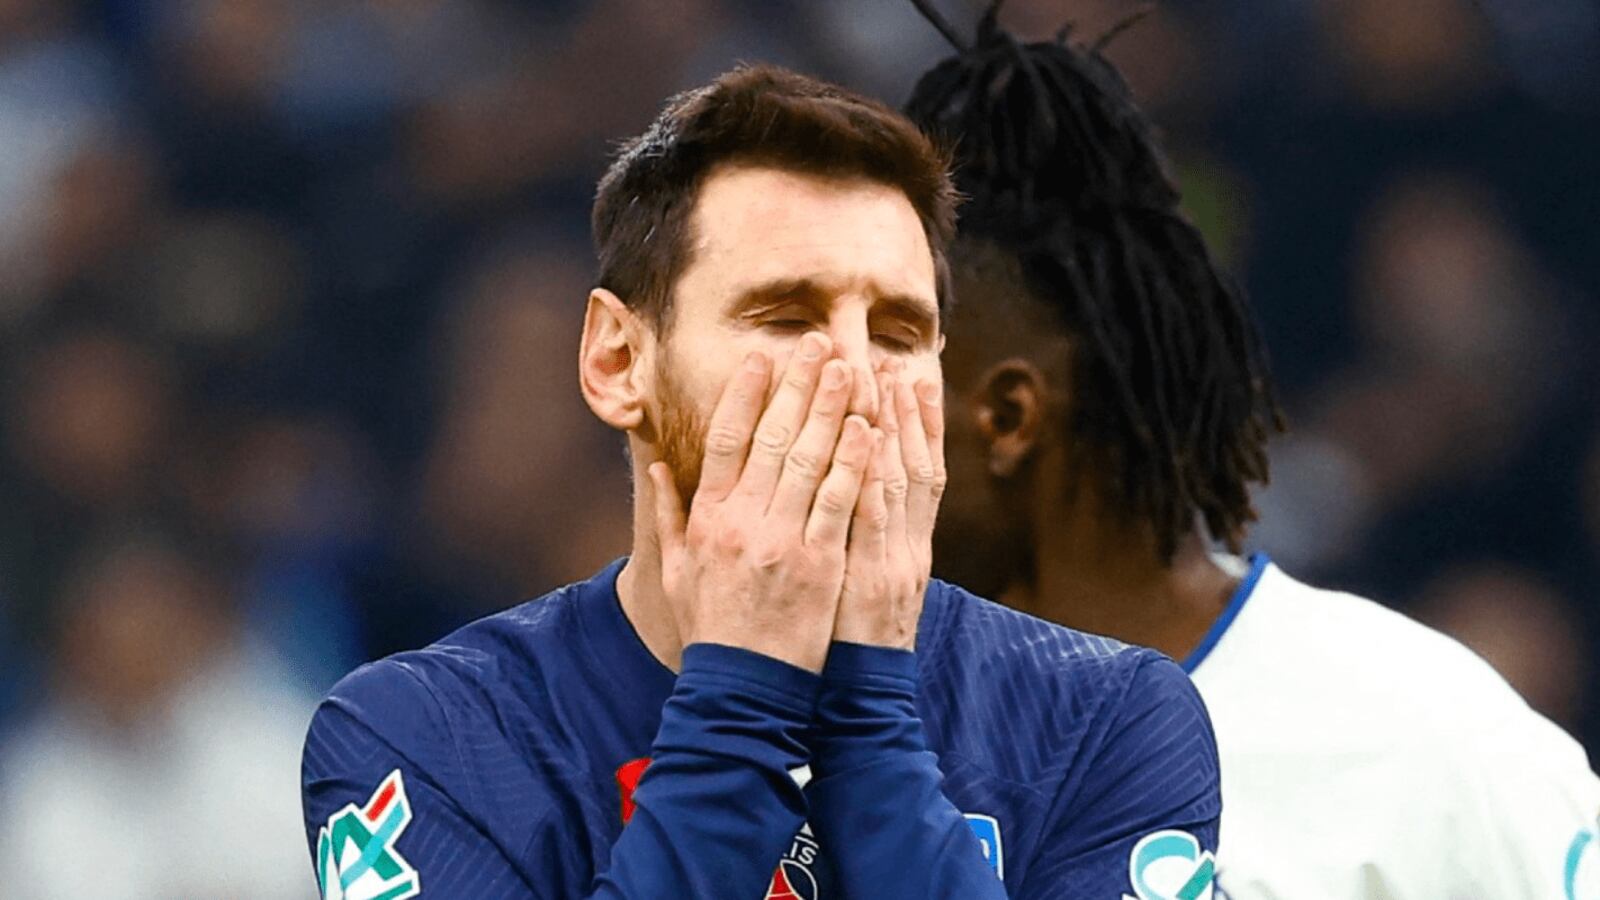 While Messi's salary does not improve, what PSG wants to spend in their stadium